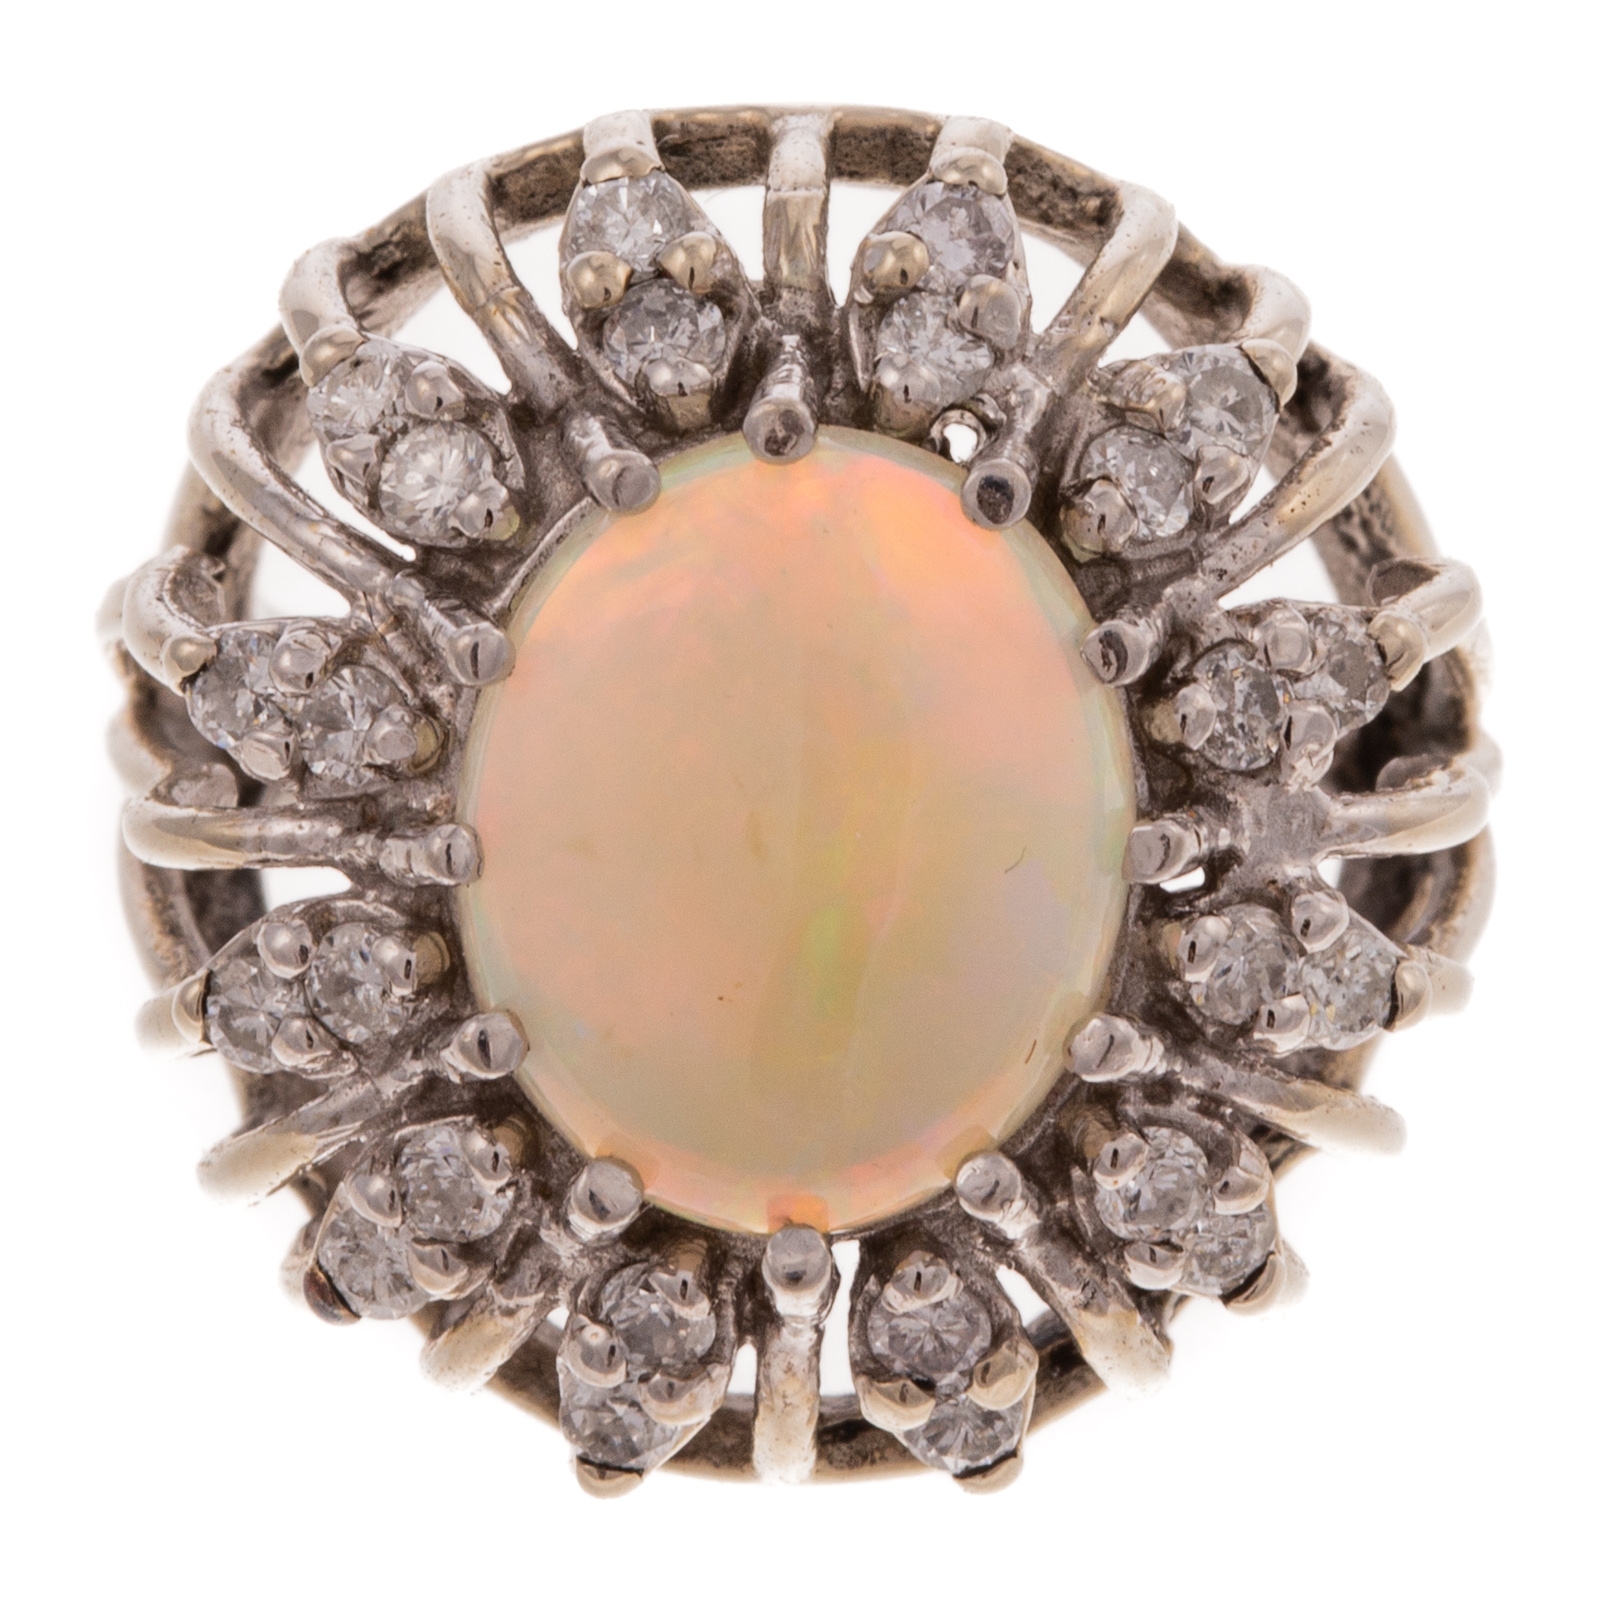 A 2.00 CT OPAL & DIAMOND RING IN